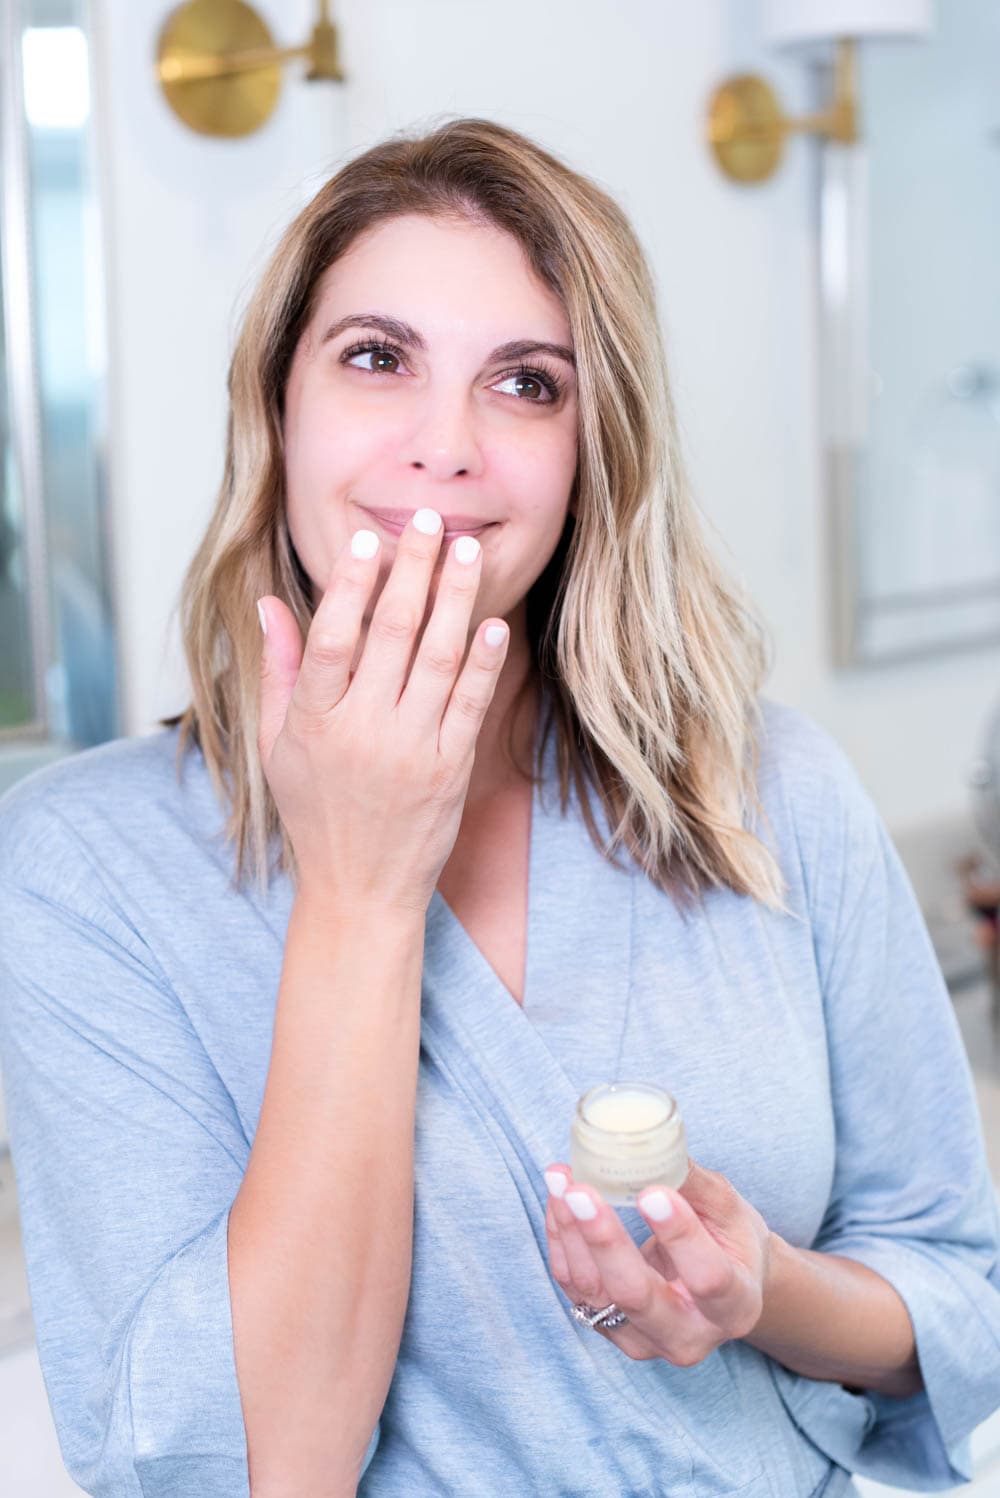 Using safe and cleaner beauty products on your face are game-changing in your morning skincare routine. This is a step by step guide on the best skincare products to use to fight aging. #ABlissfulNest #skincare #skincareroutine40s